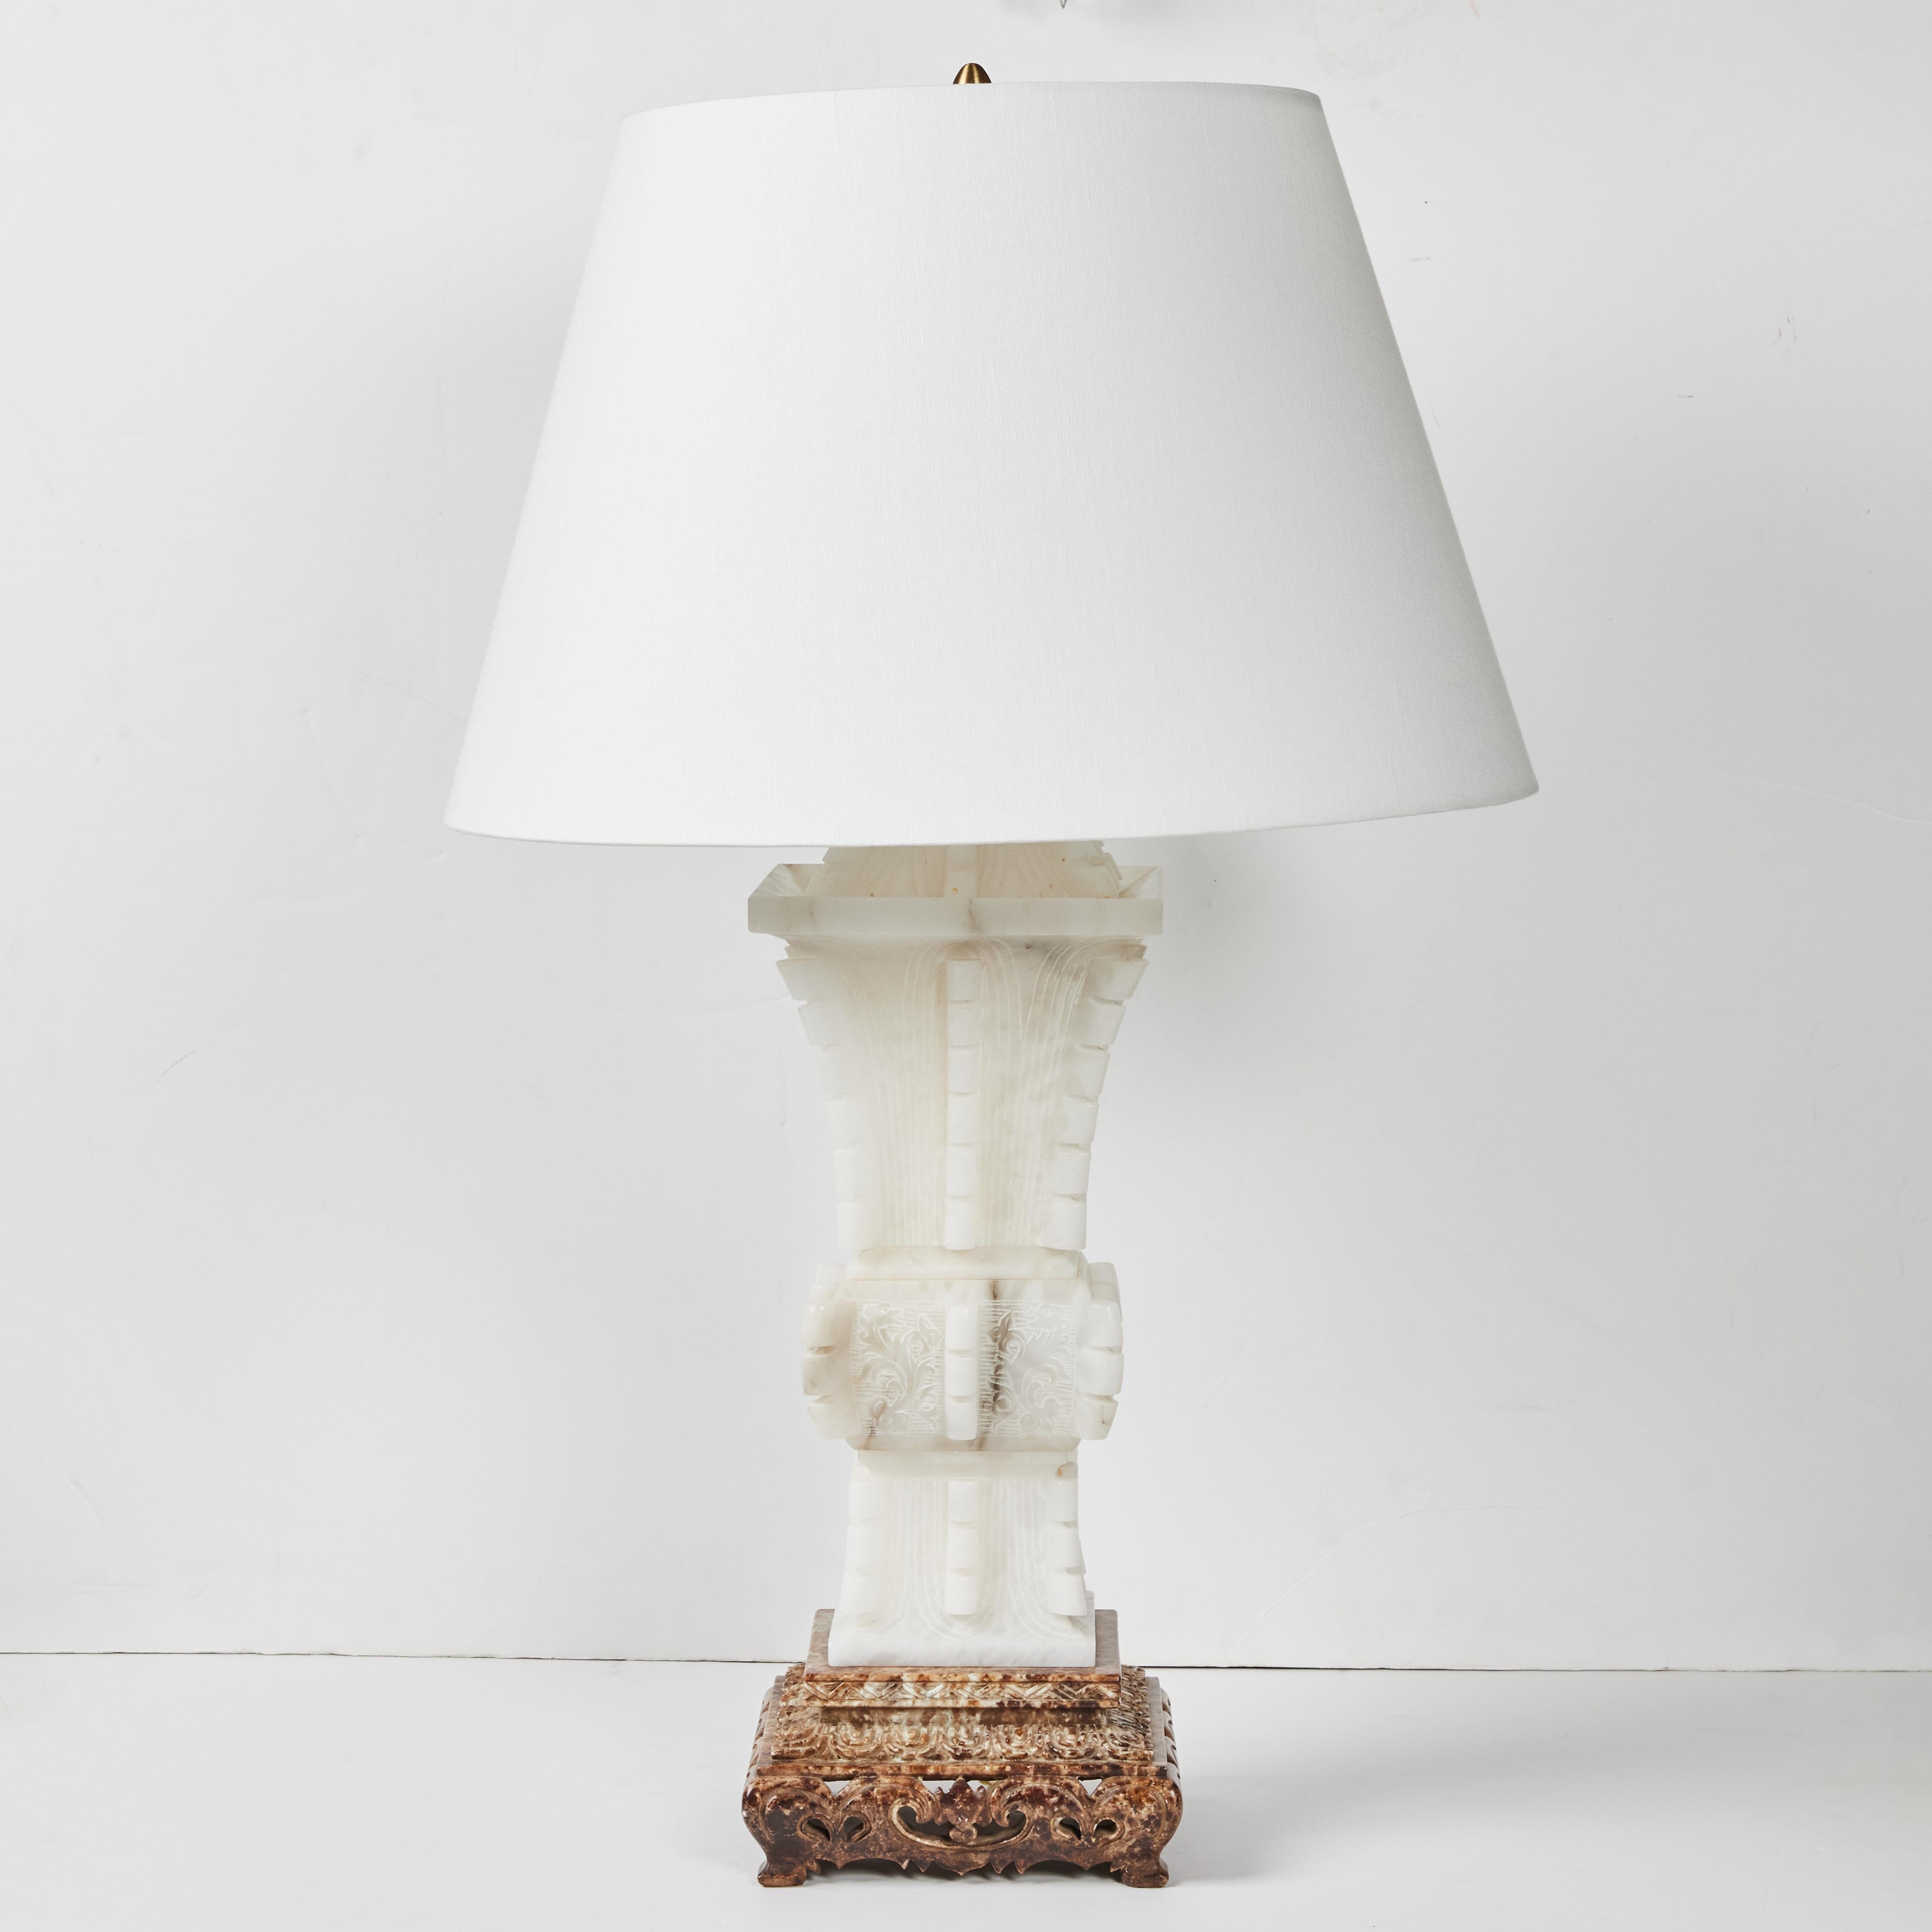 Solid alabaster lamp, hand carved in Italy, in Chinoiserie style by Marbro Company.  Lamps are sold separately and are slightly different heights noted below.  Alabaster is 22